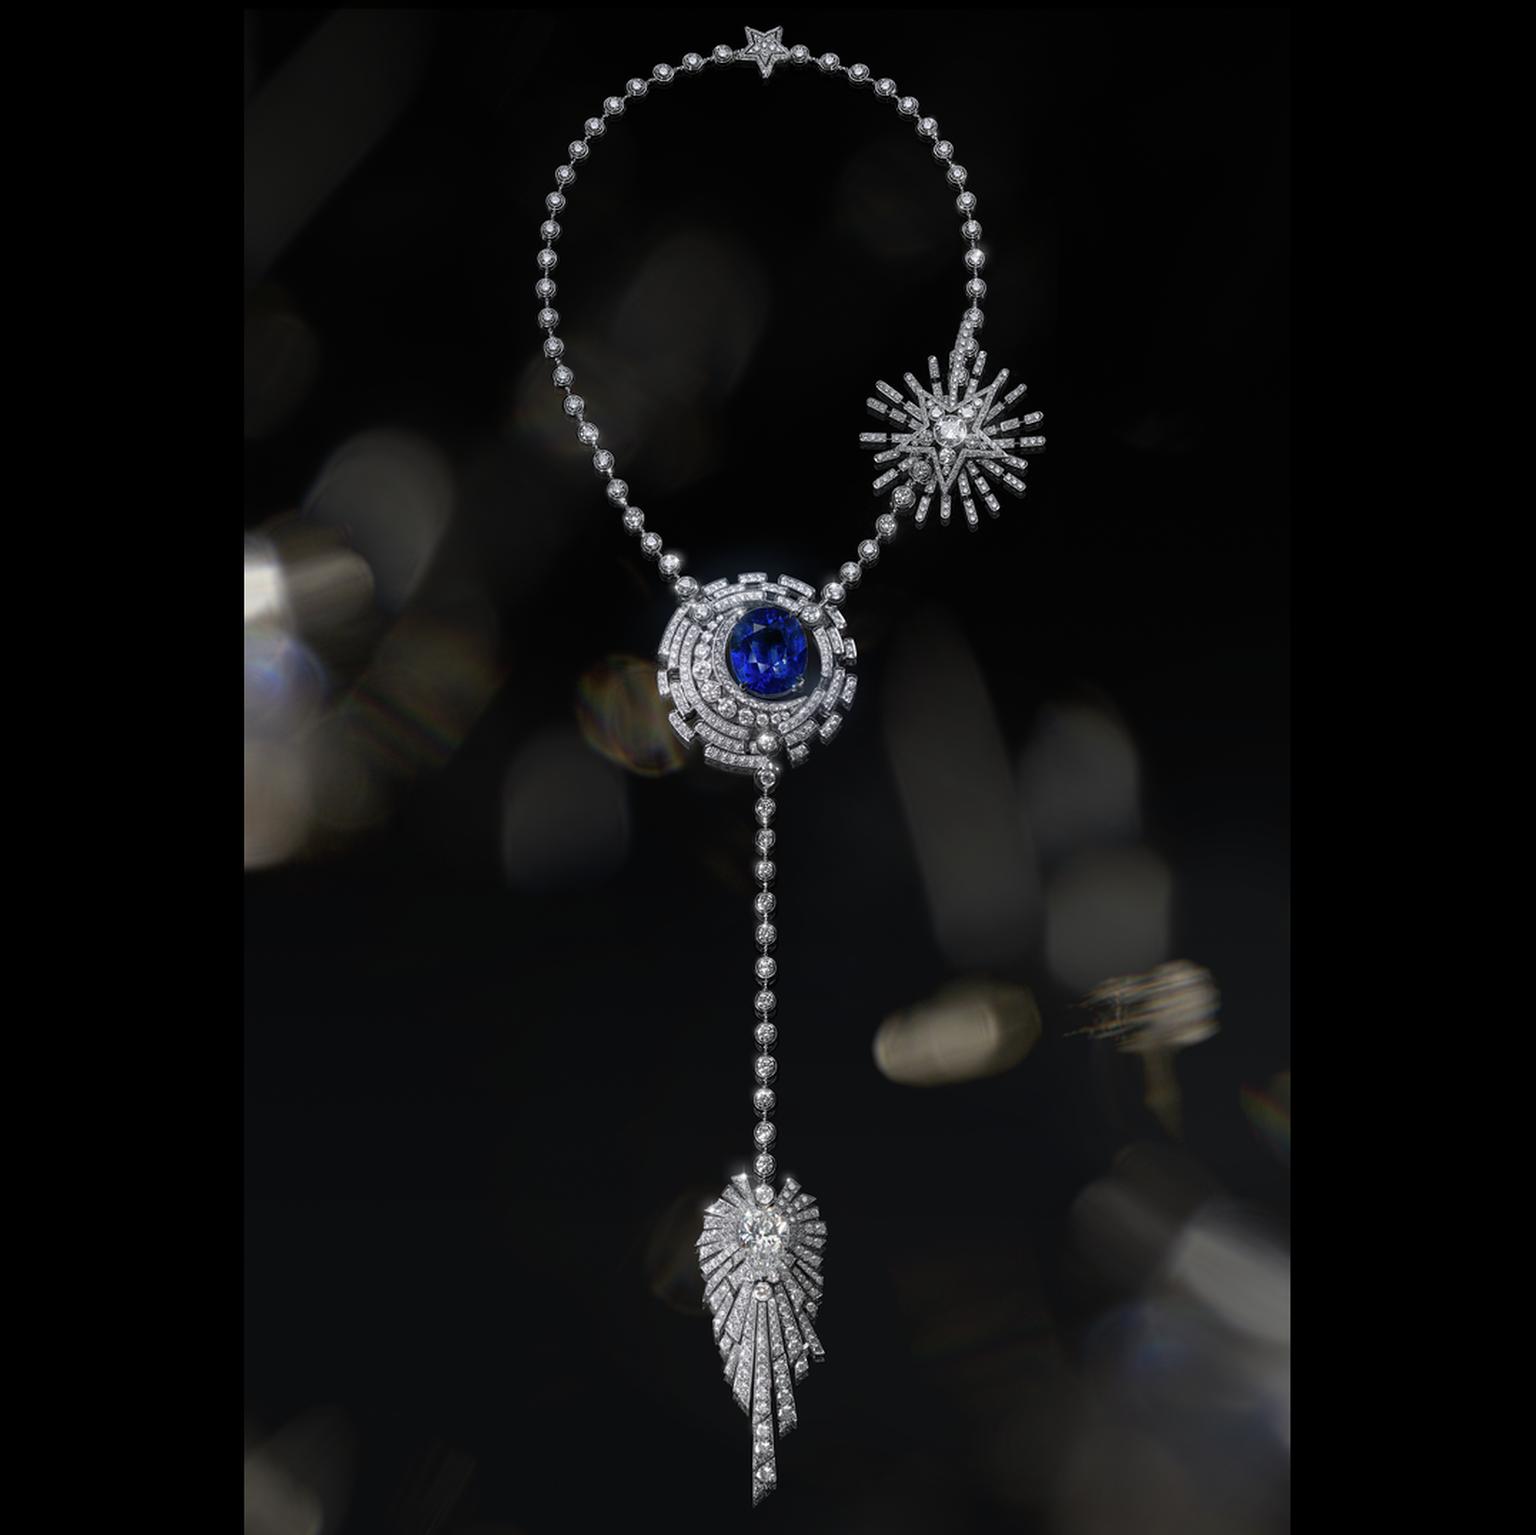 Paris's High Jewelry Collections 2022 - New High Jewelry Presentations